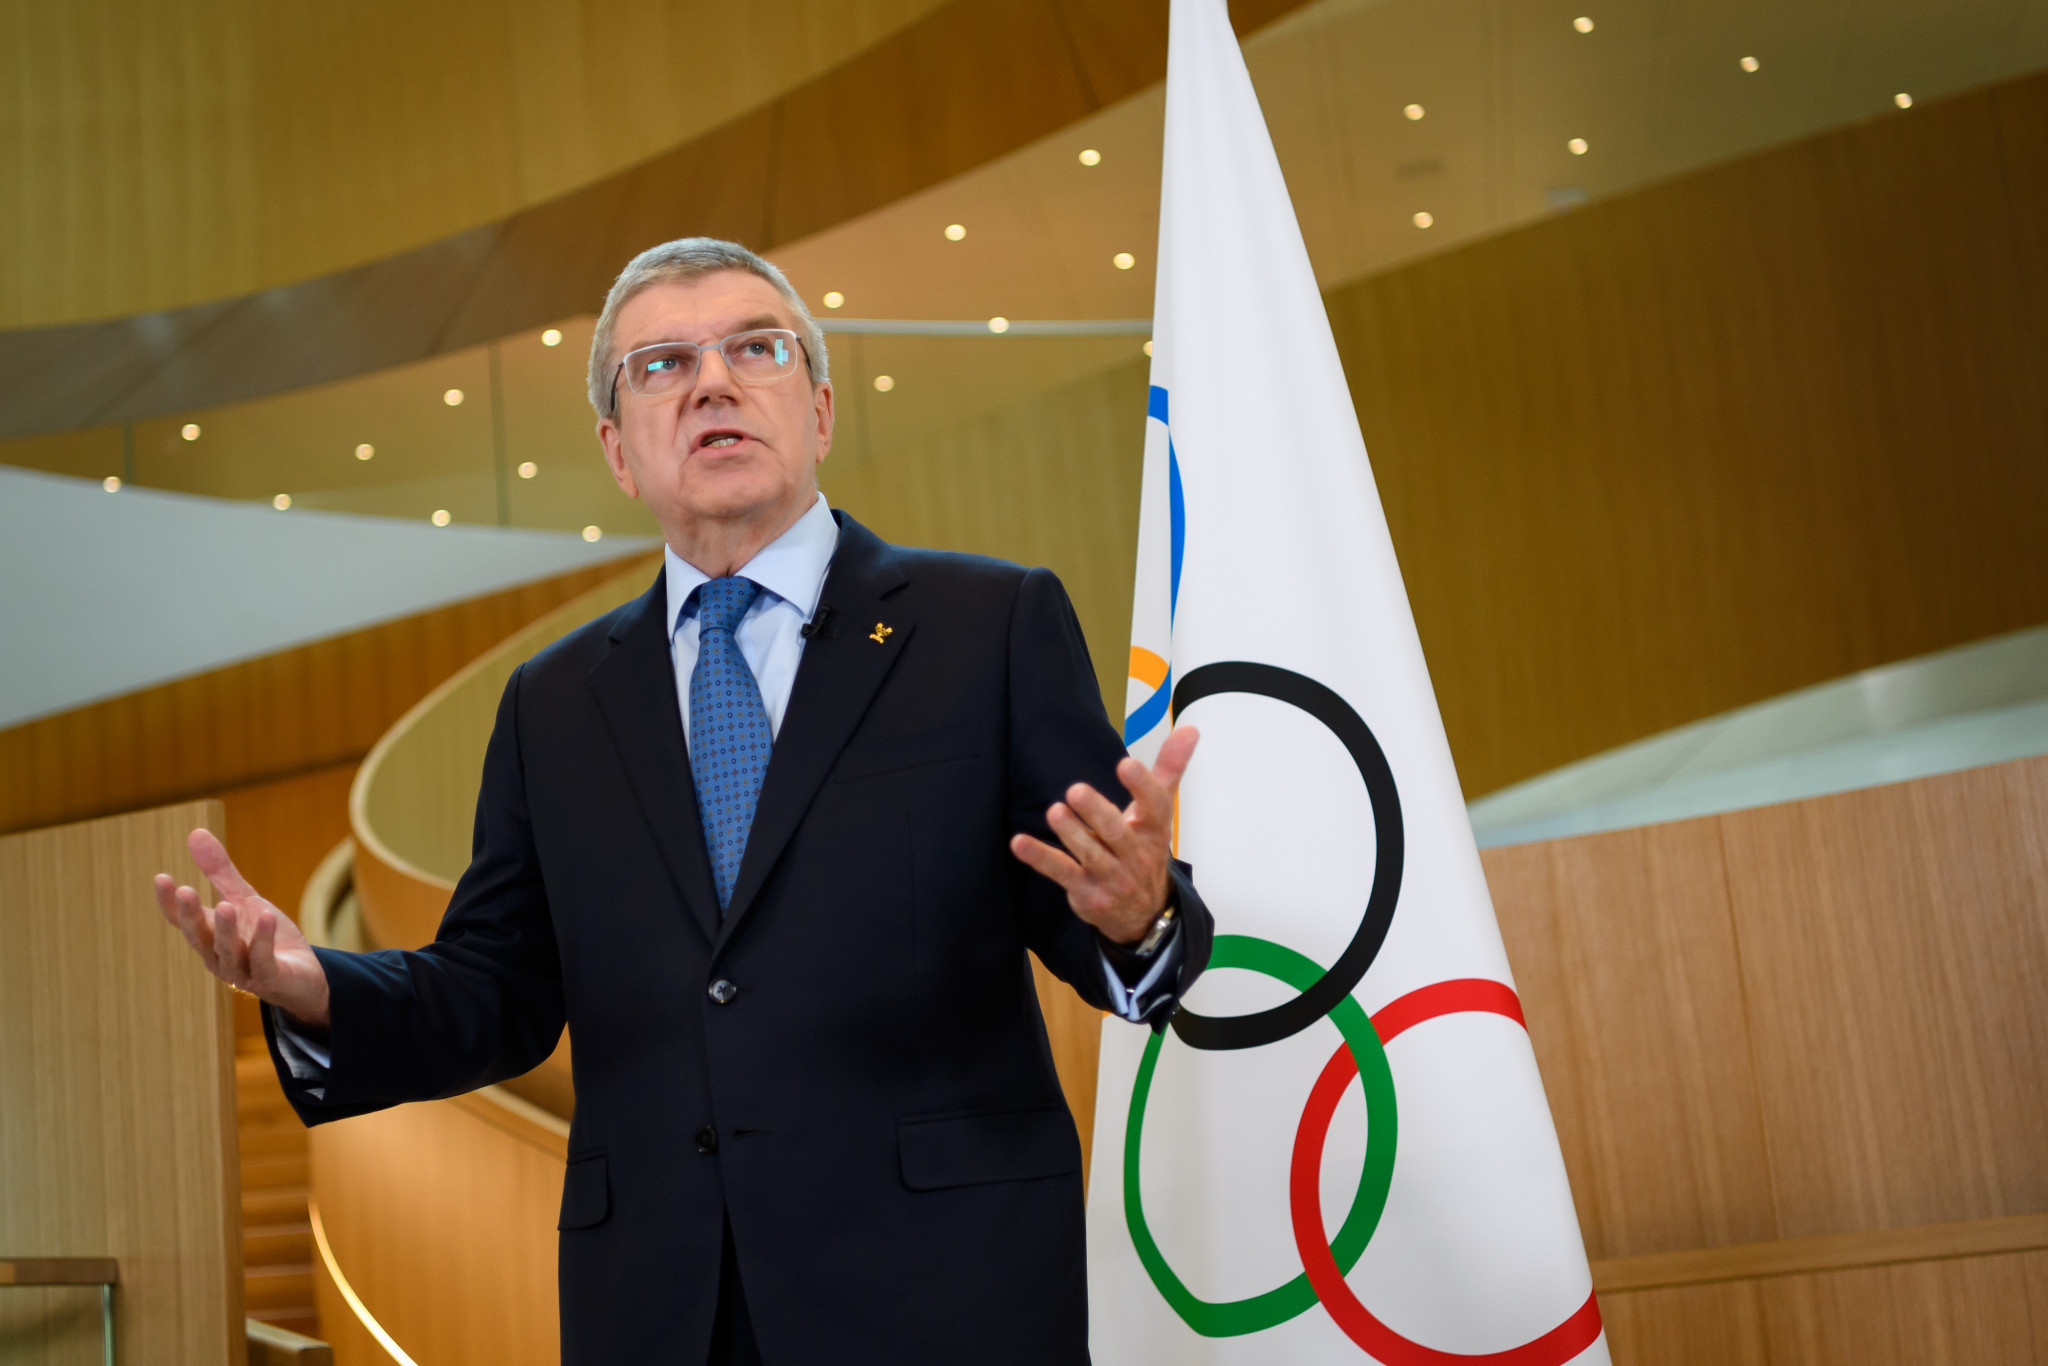 IOC President Thomas Bach insisted testing and a COVID-19 vaccine is not a "silver bullet" for the Olympic and Paralympic Games in Tokyo next year ©Getty Images